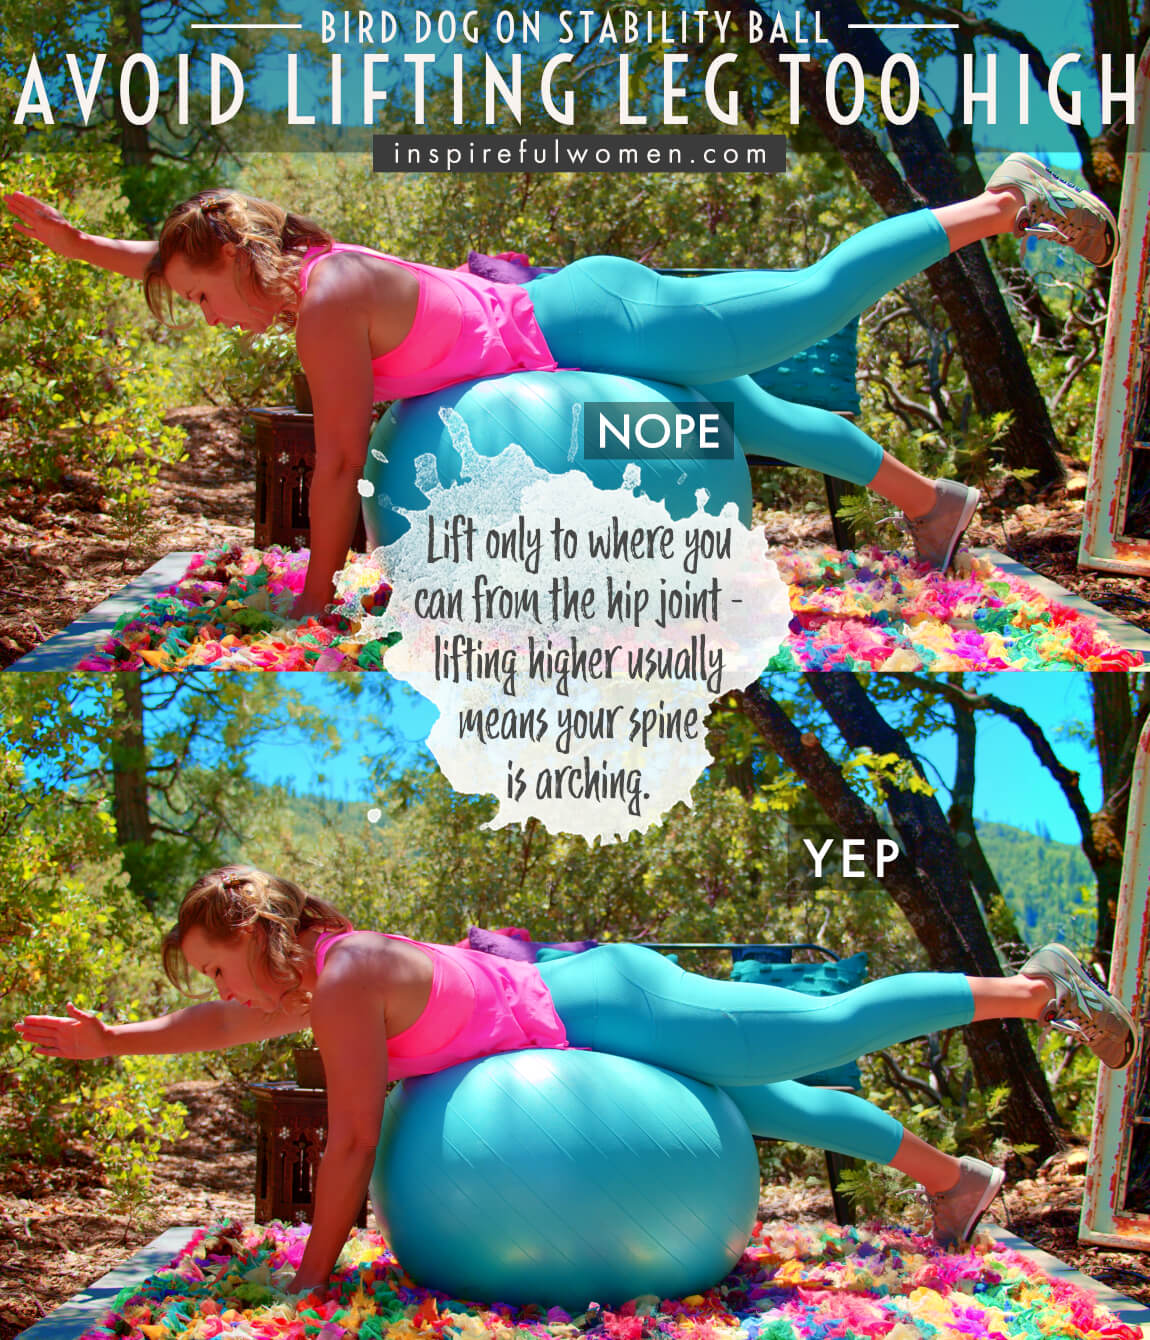 avoid-lifting-leg-too-high-stability-ball-supported-bird-dog-home-core-workout-proper-form